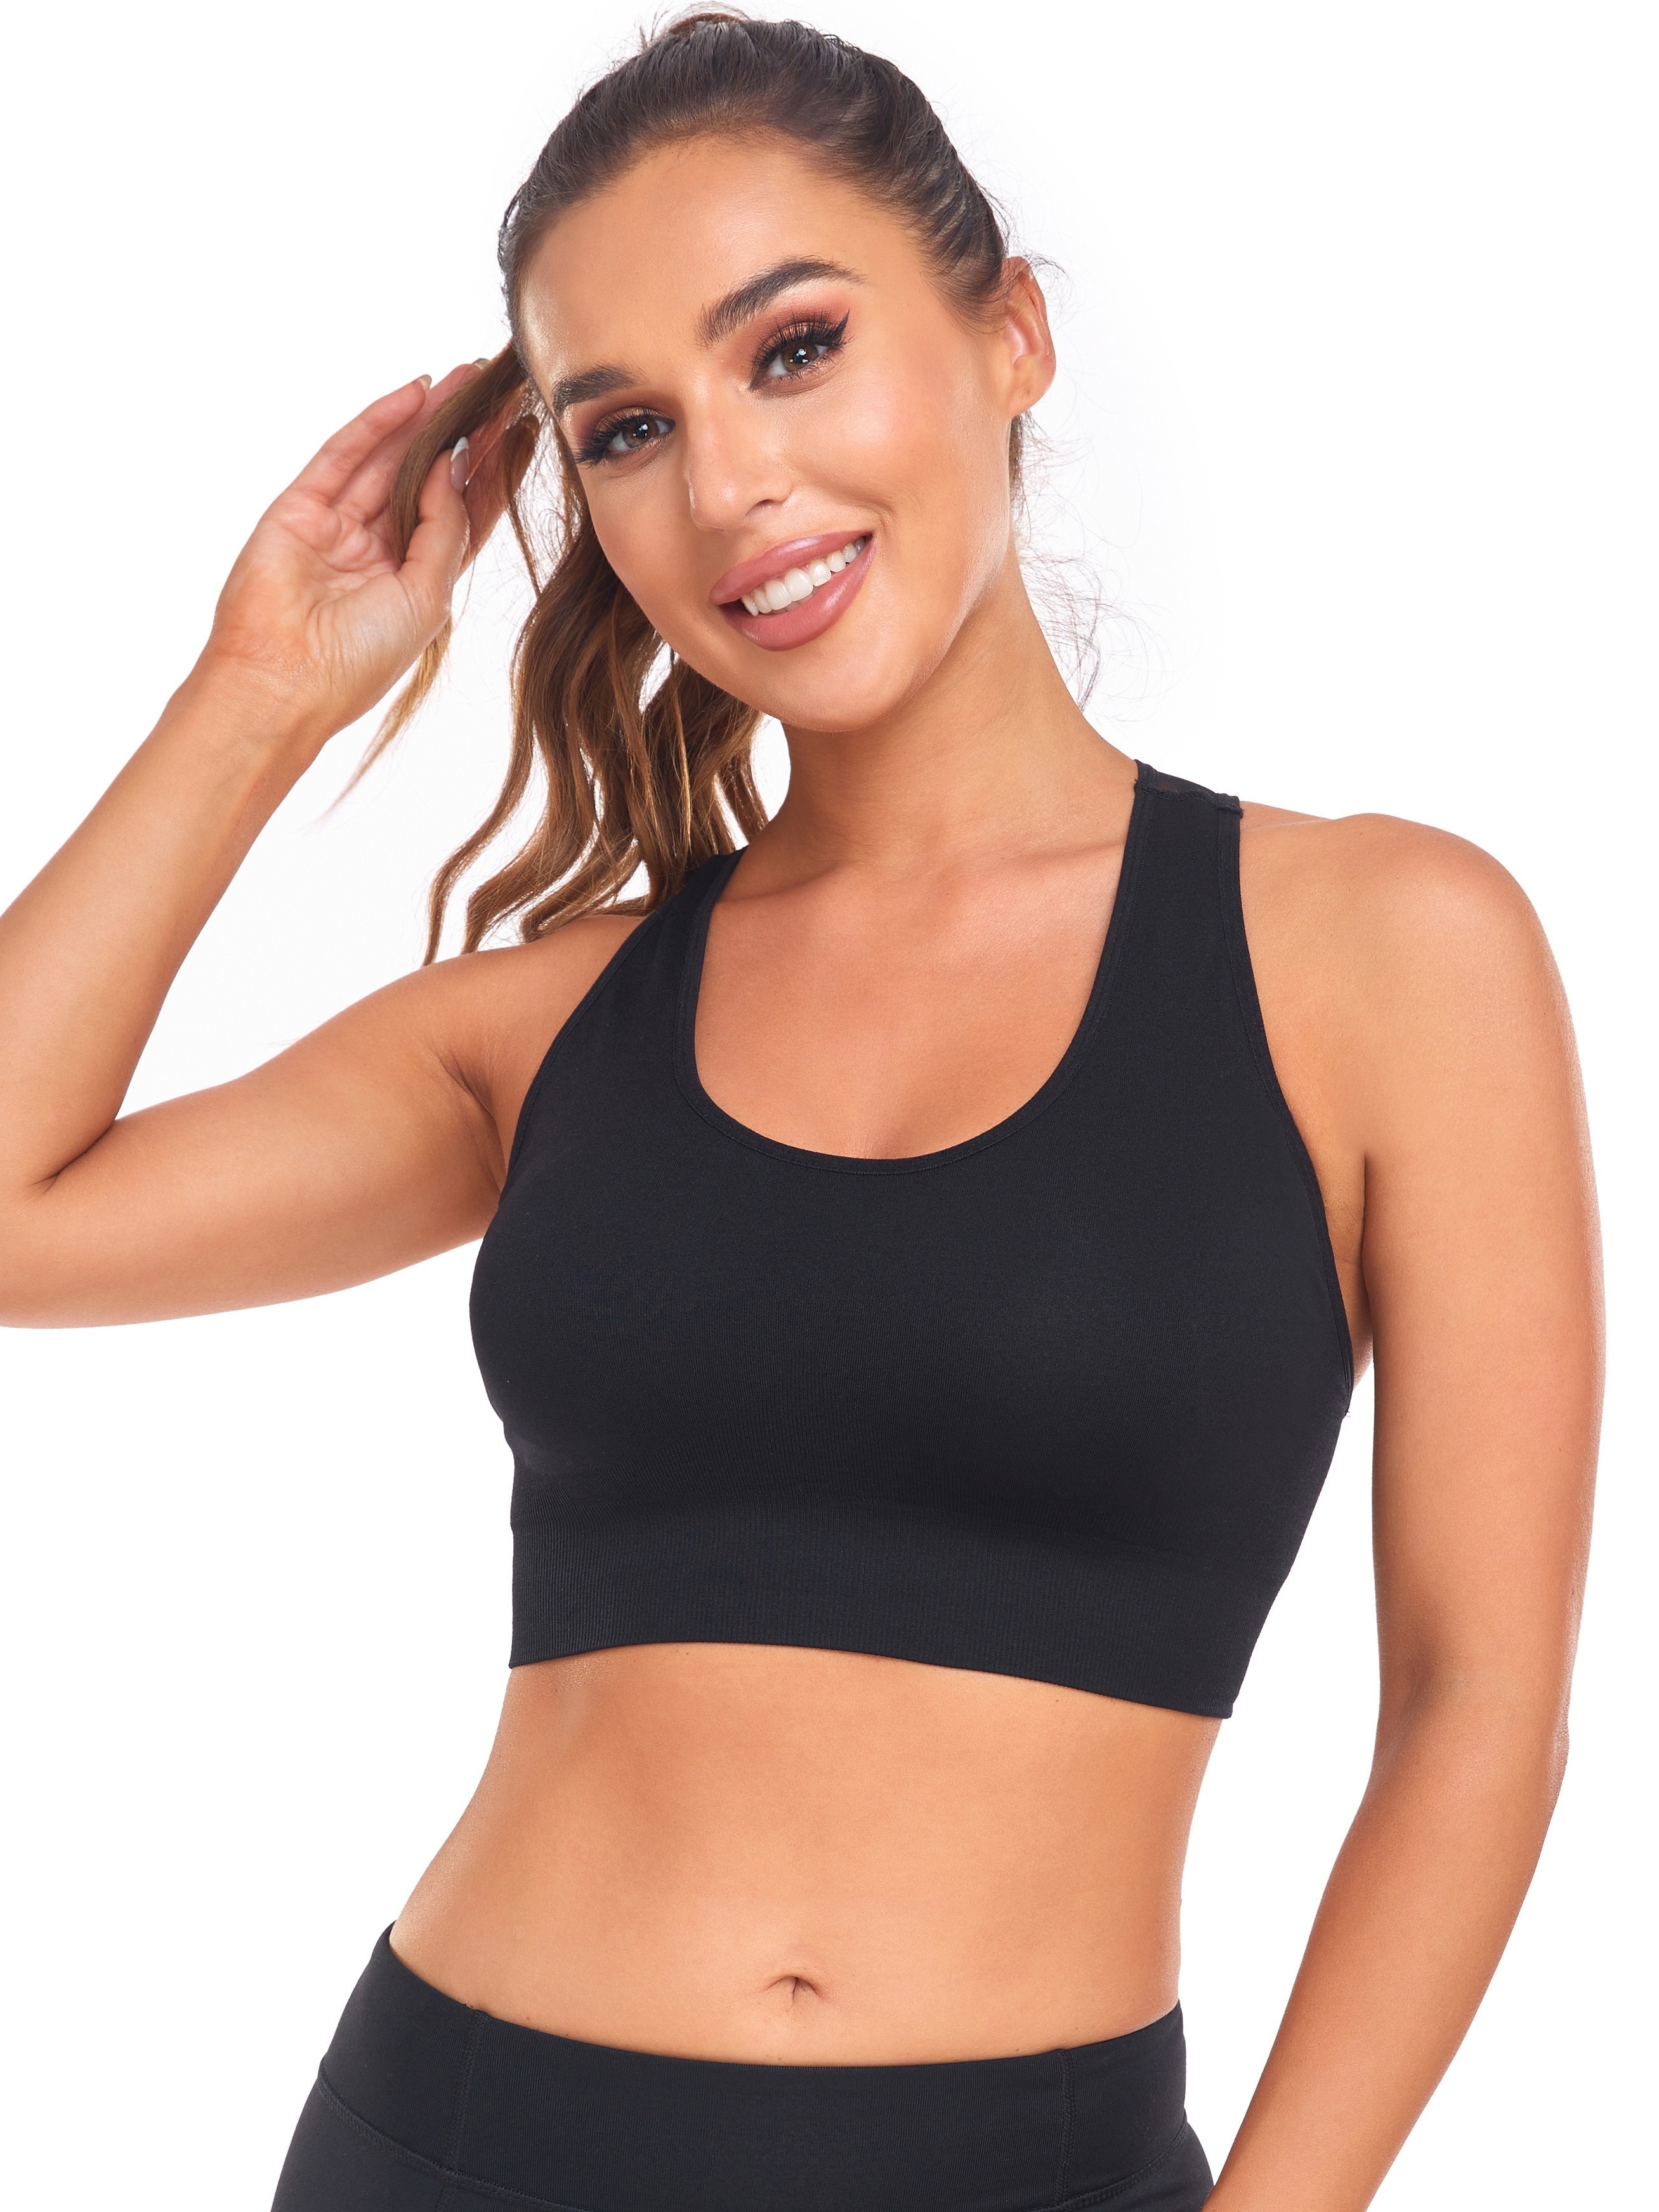 Backless Backless Longline Sports Bra For Women Quick Dry, Push Up